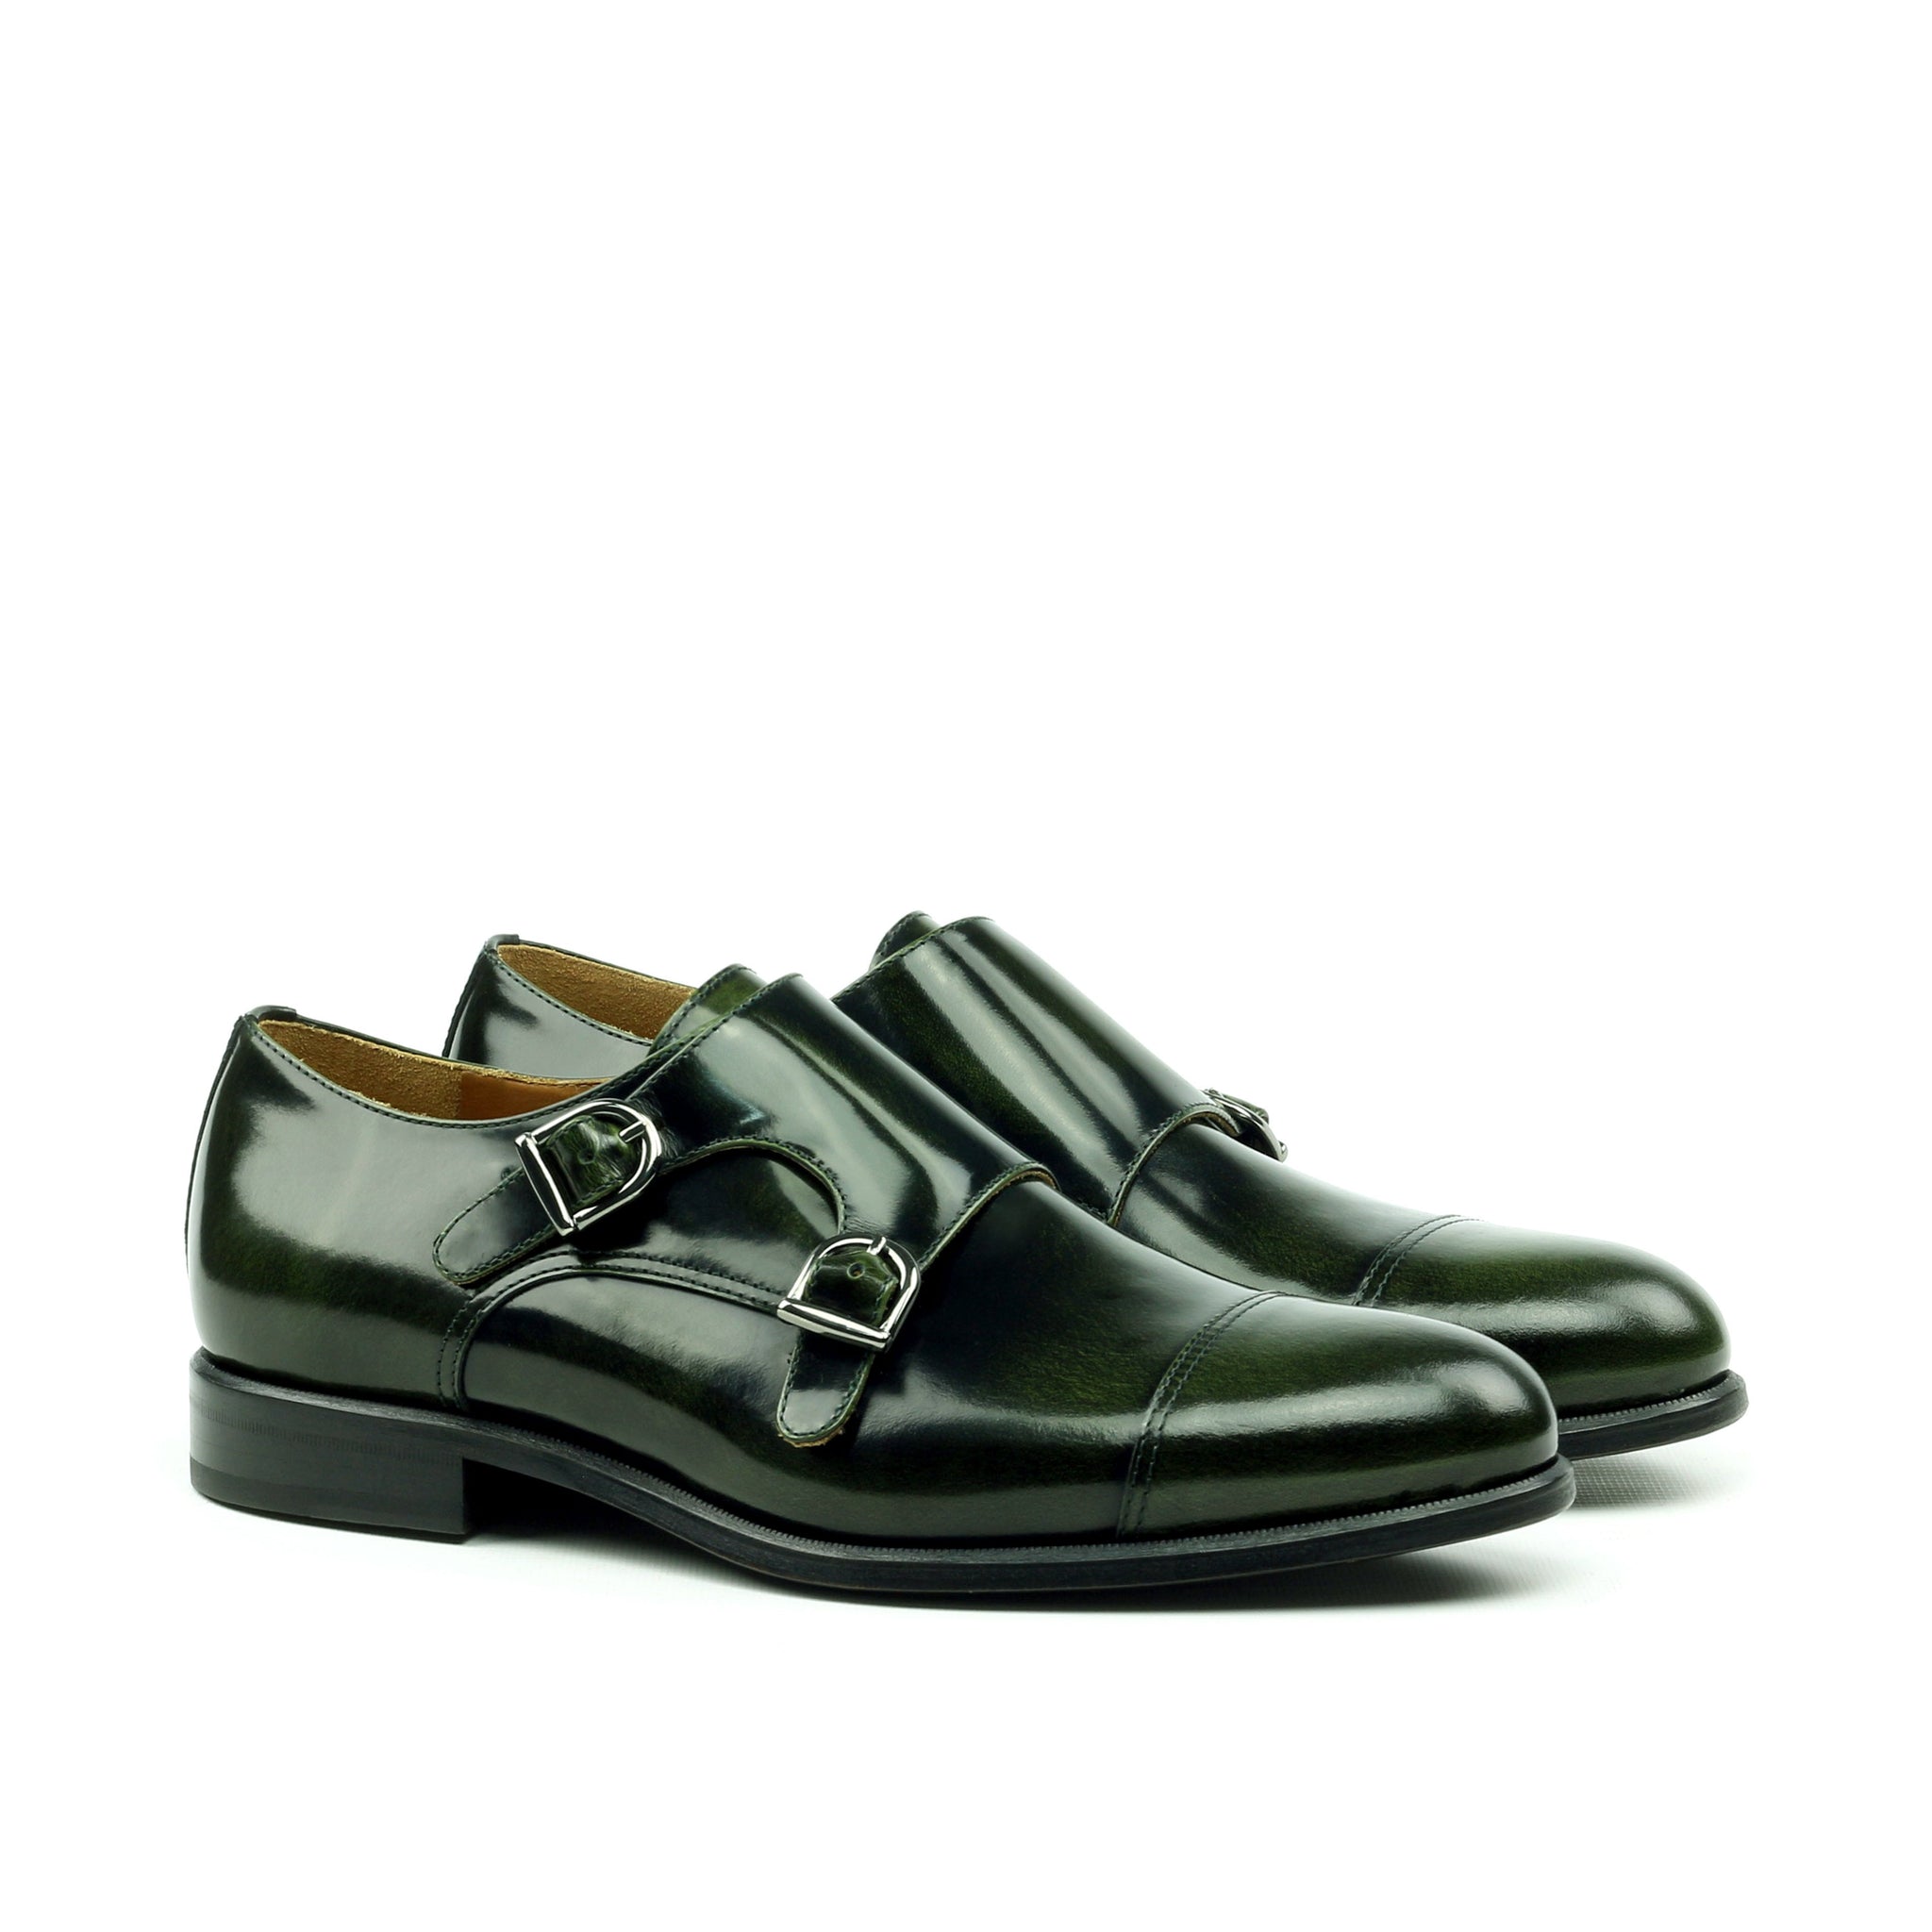 Unique Handcrafted Green Polished Calf Double Strap Monkstrap